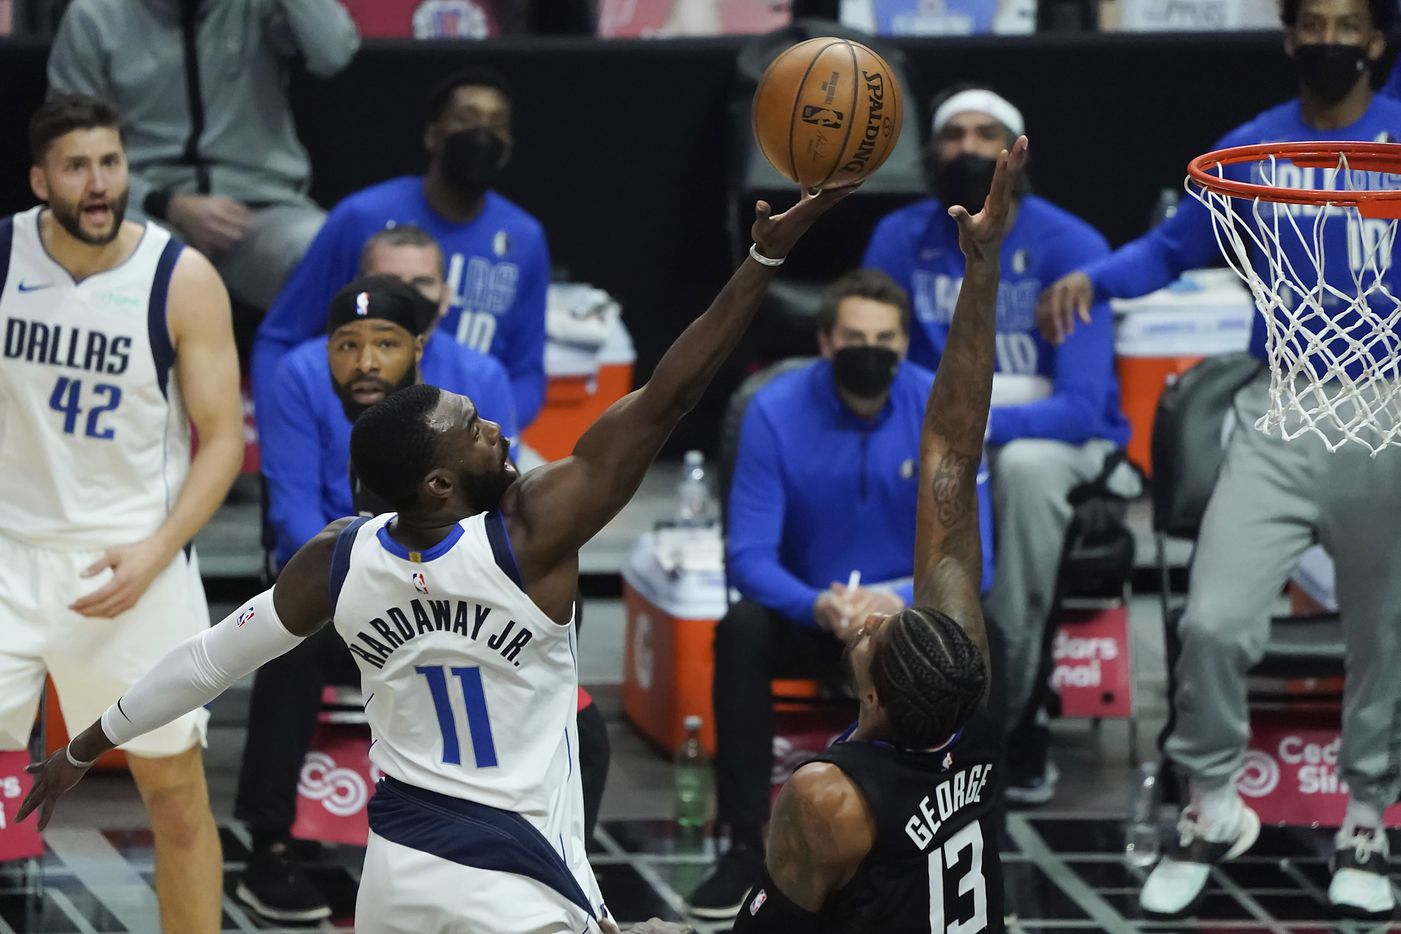 Dallas Mavericks forward Tim Hardaway Jr. (11) has a shot blocked by LA Clippers guard Paul George (13) during the first half of an NBA playoff basketball game at Staples Center on Tuesday, May 25, 2021, in Los Angeles.